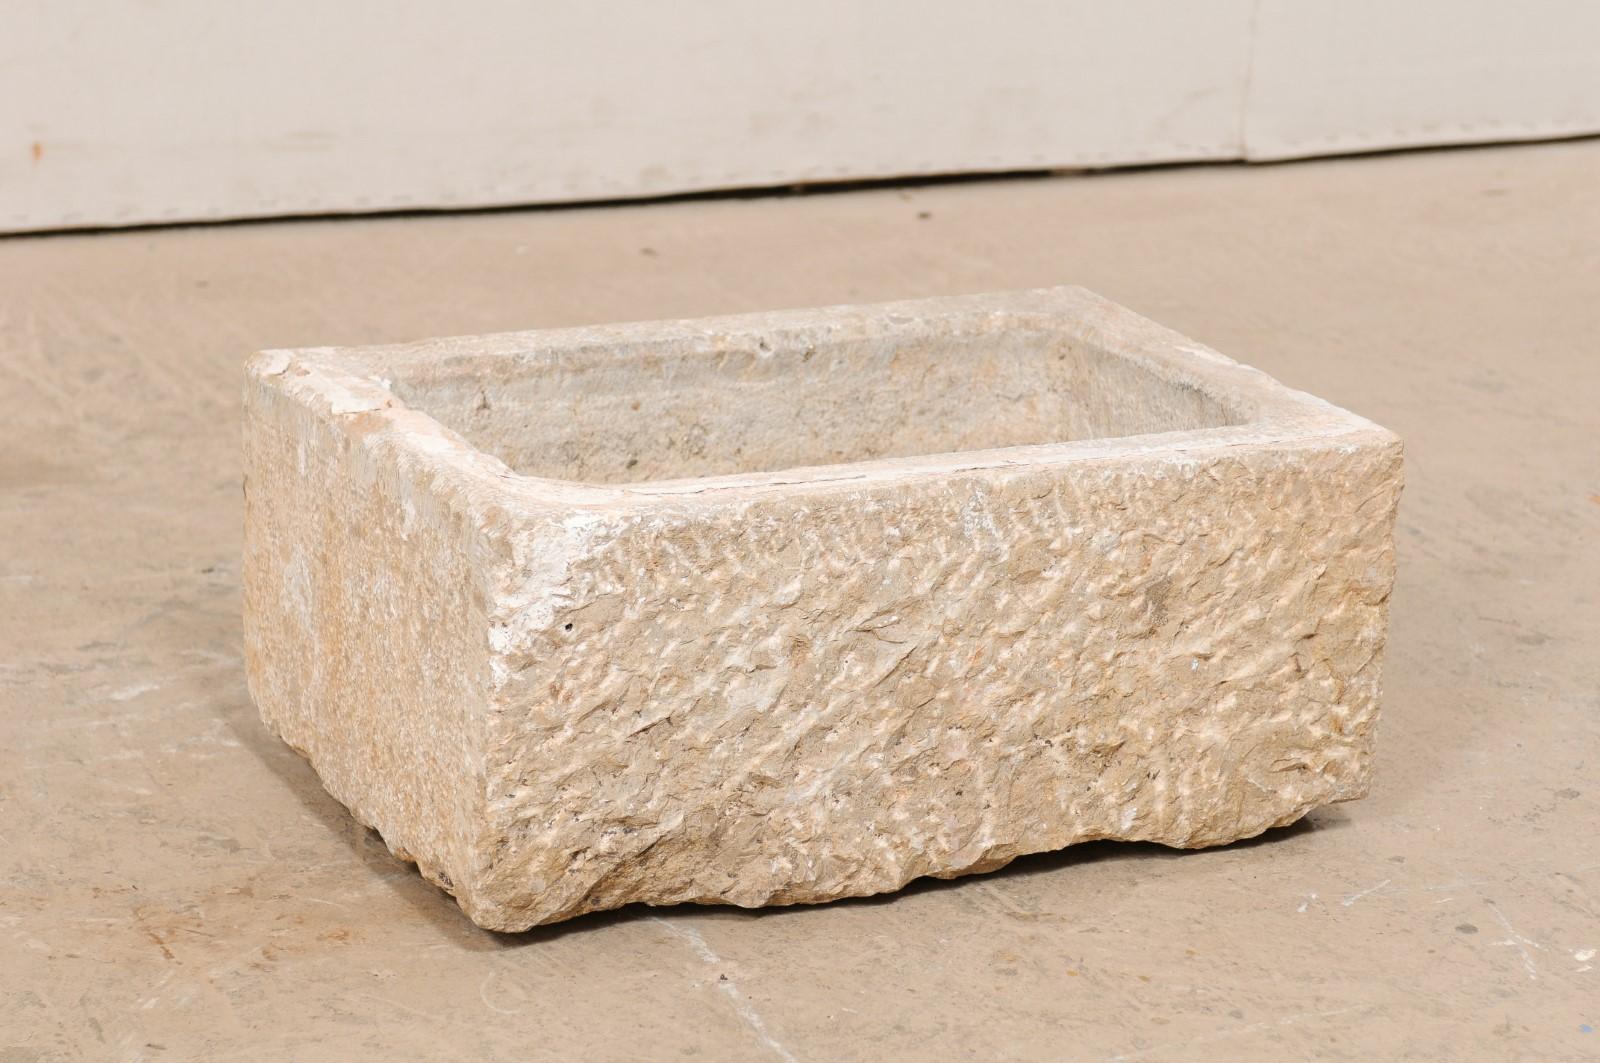 A Spanish carved stone trough from the 19th century. This antique trough from Spain, with it's rectangular shape, has been hand carved out of a single piece of stone, having a nicely textured surface. In addition to standing alone as a decorative